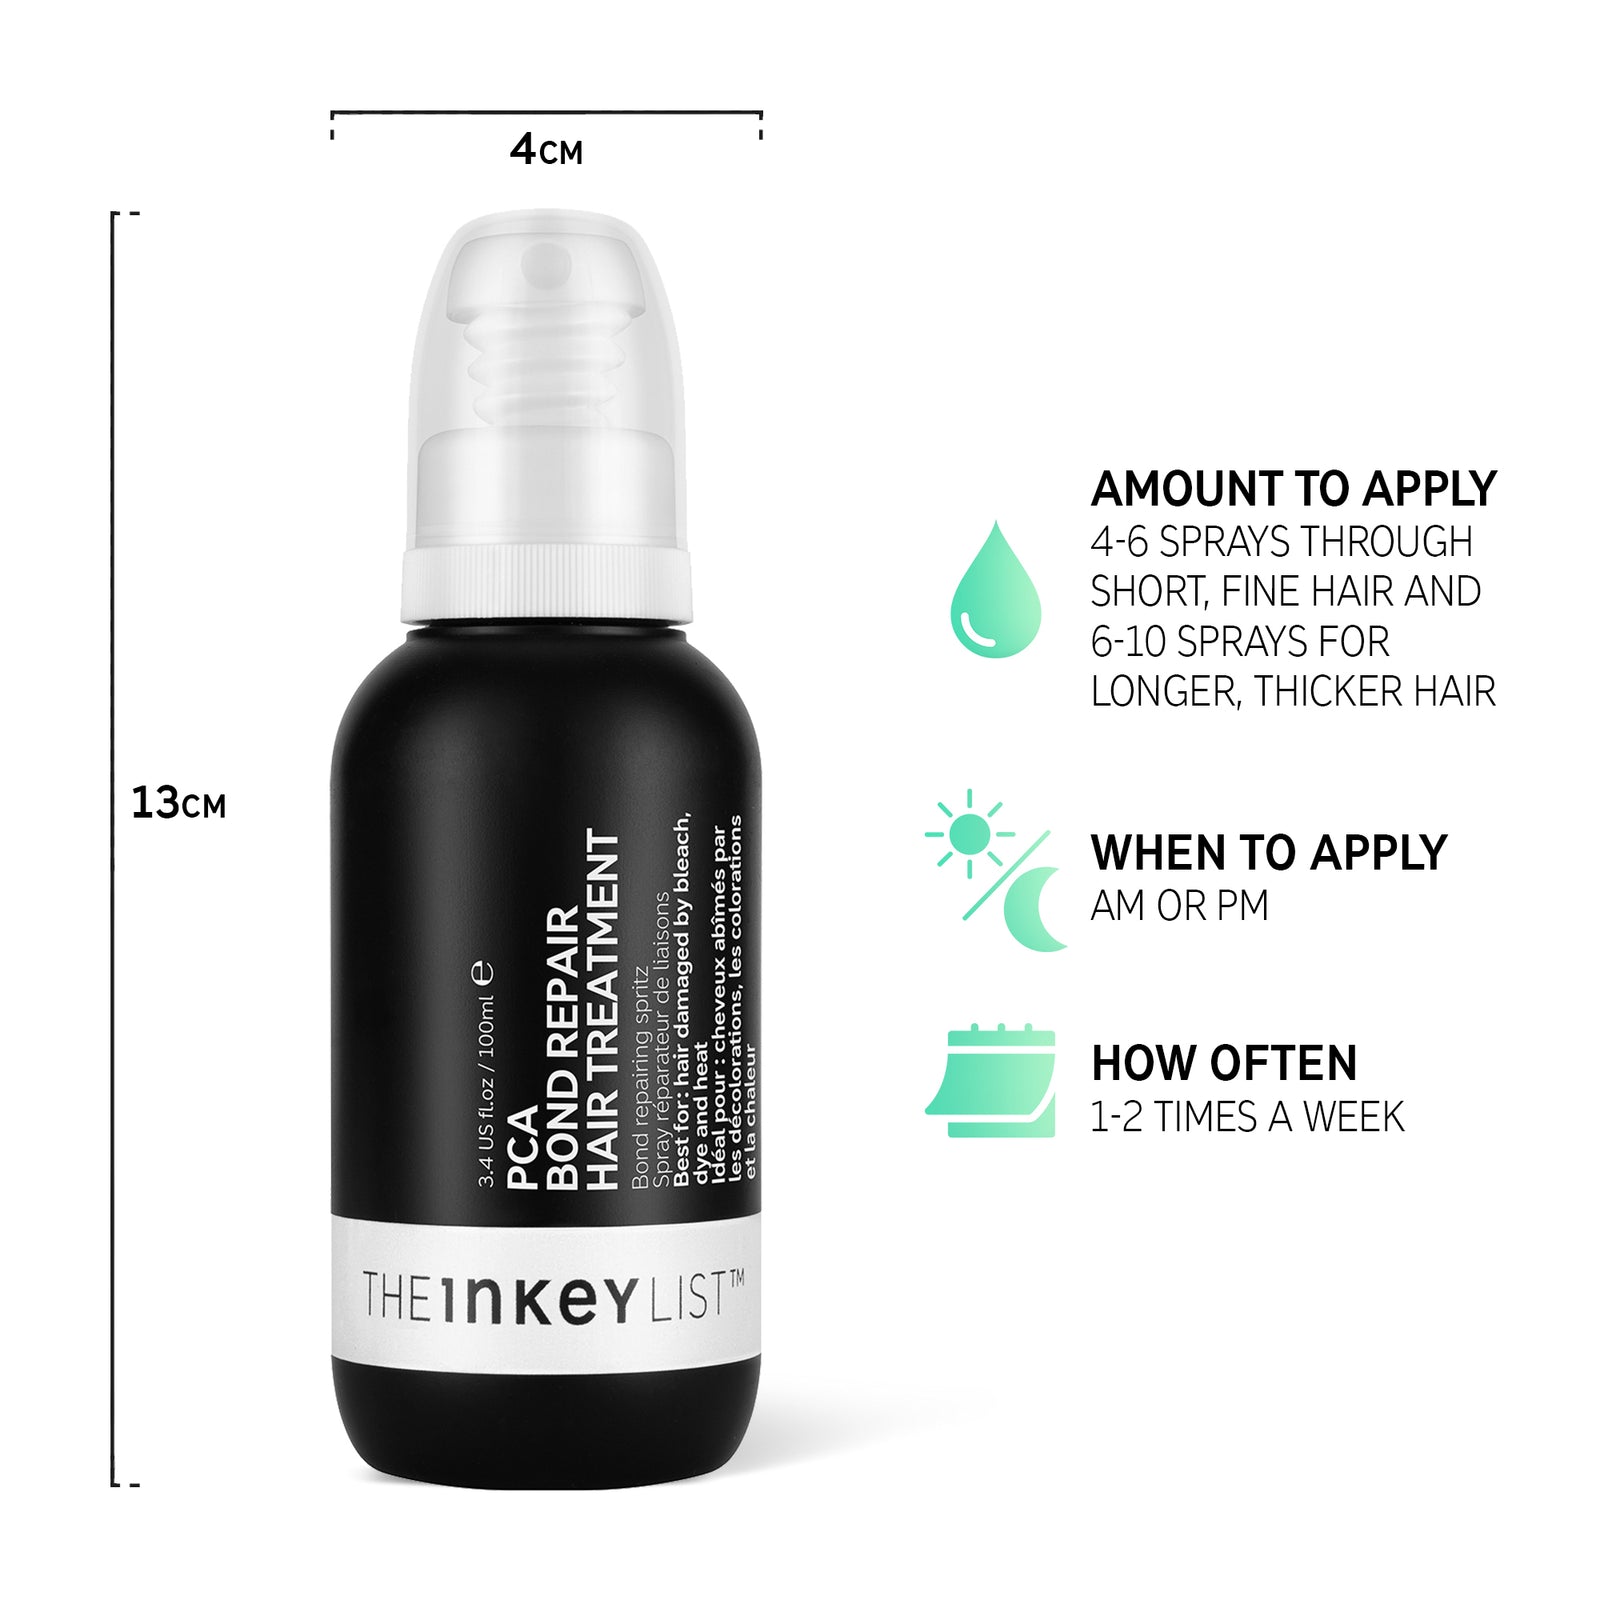 PCA Bond Repair Hair Treatment bottle with when and how to use infographic. Product dimension 13m x 4cm